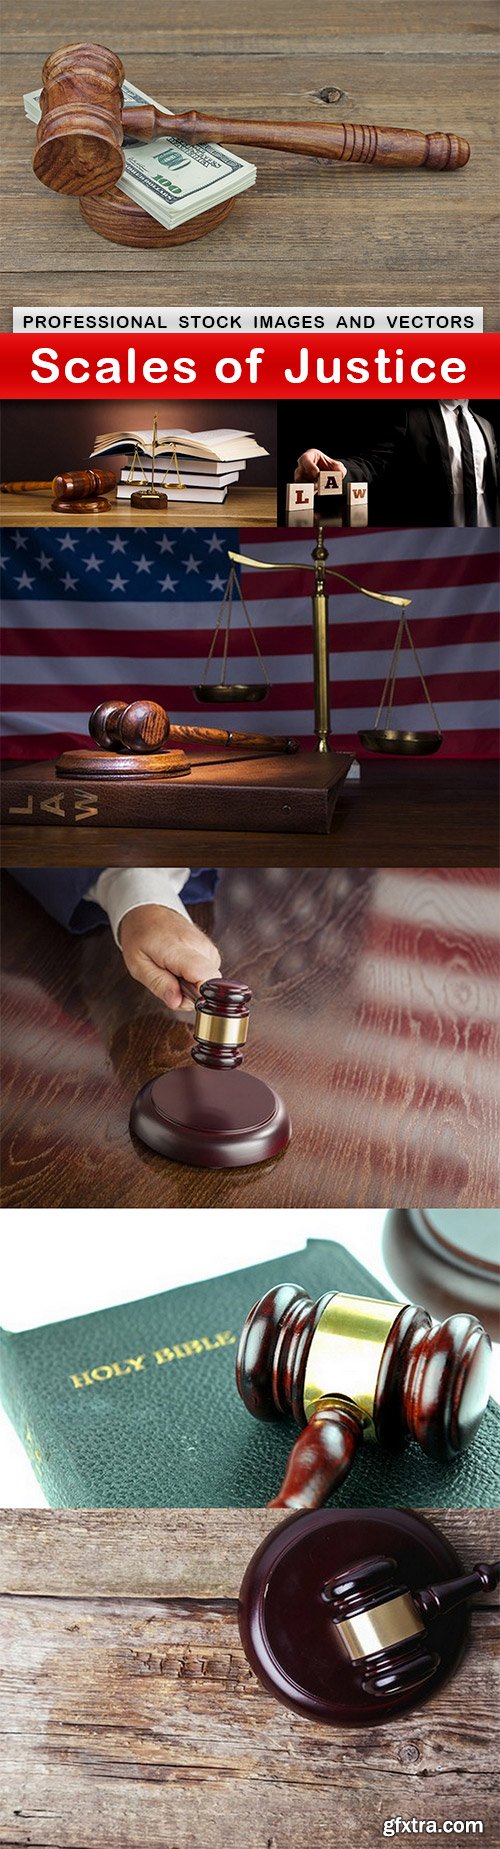 Scales of Justice - 7 UHQ JPEG